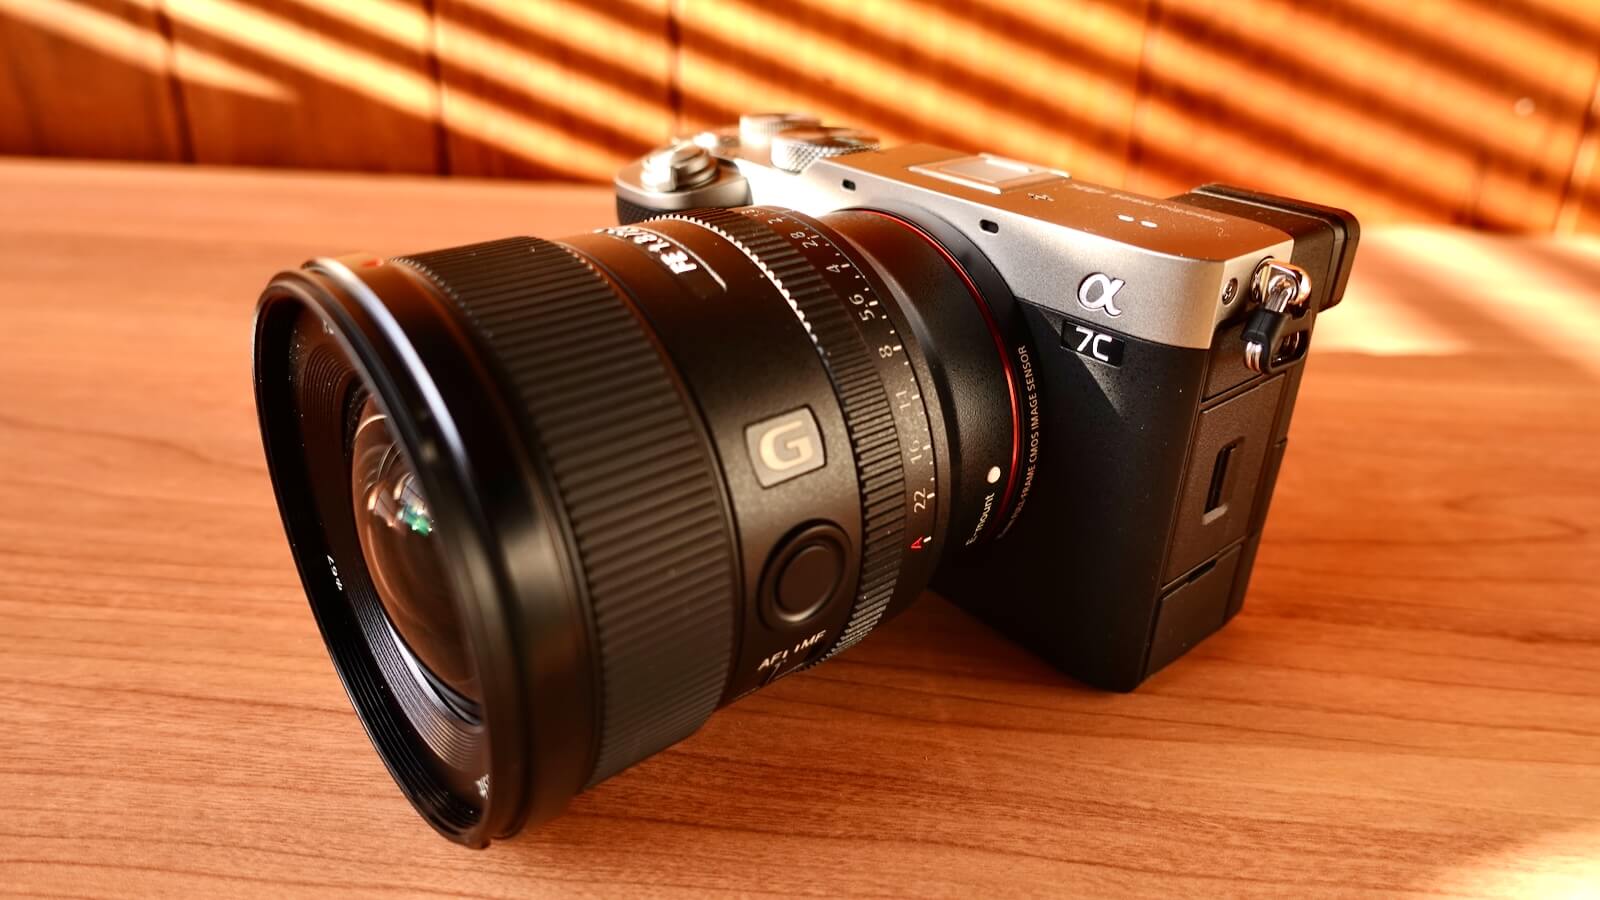 Photograph of α7c with FE 20mm F1.8 G lens attached